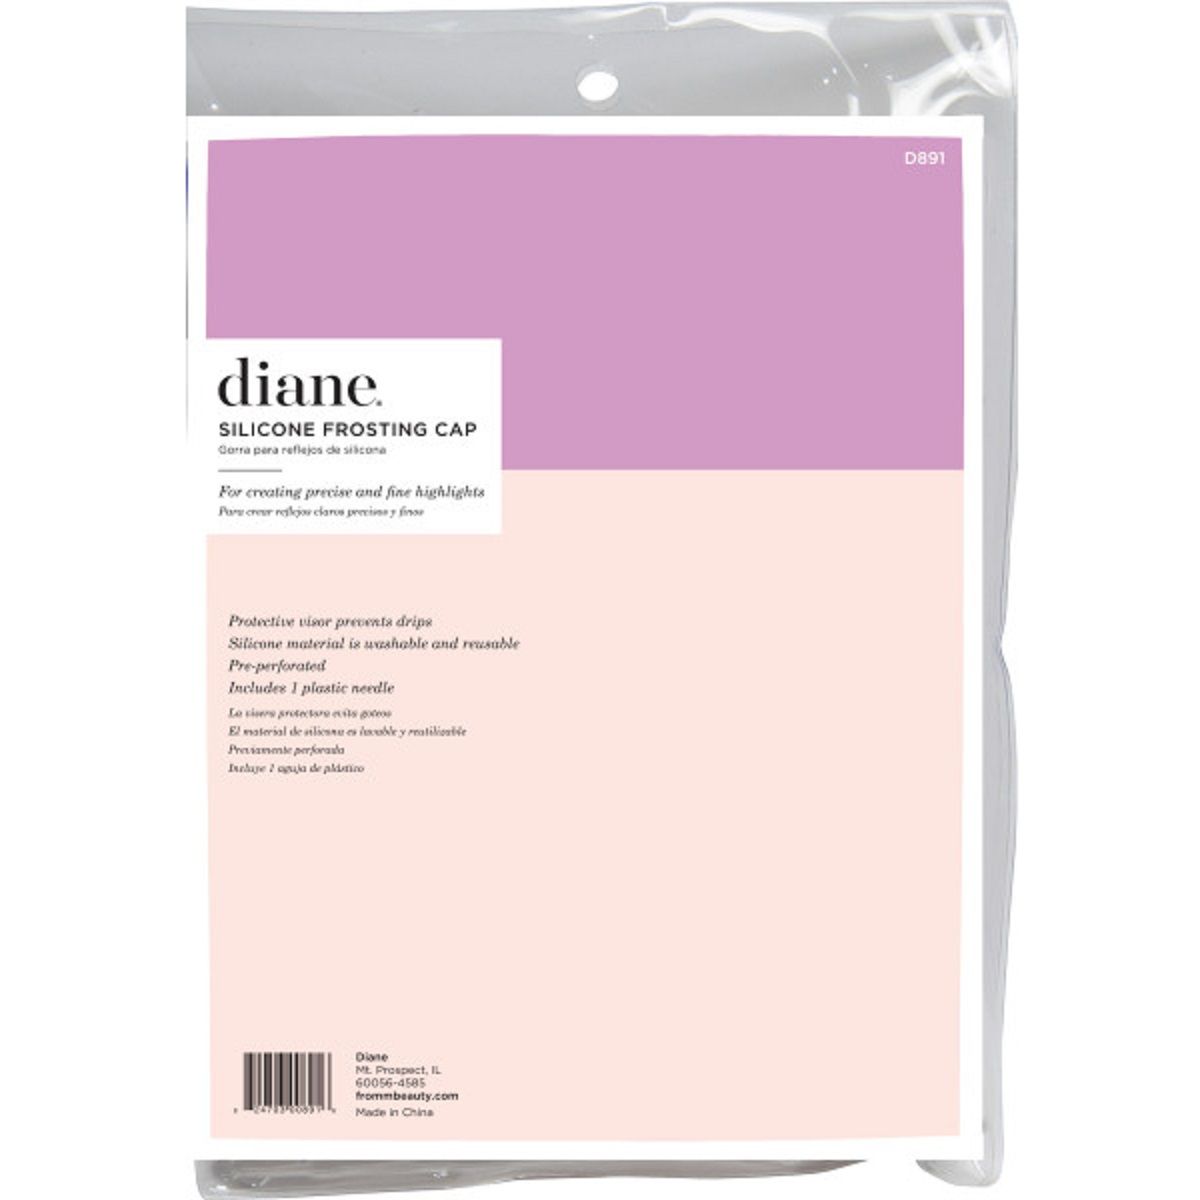 DIANE 1-PACK SILICONE FROSTING CAP #D891